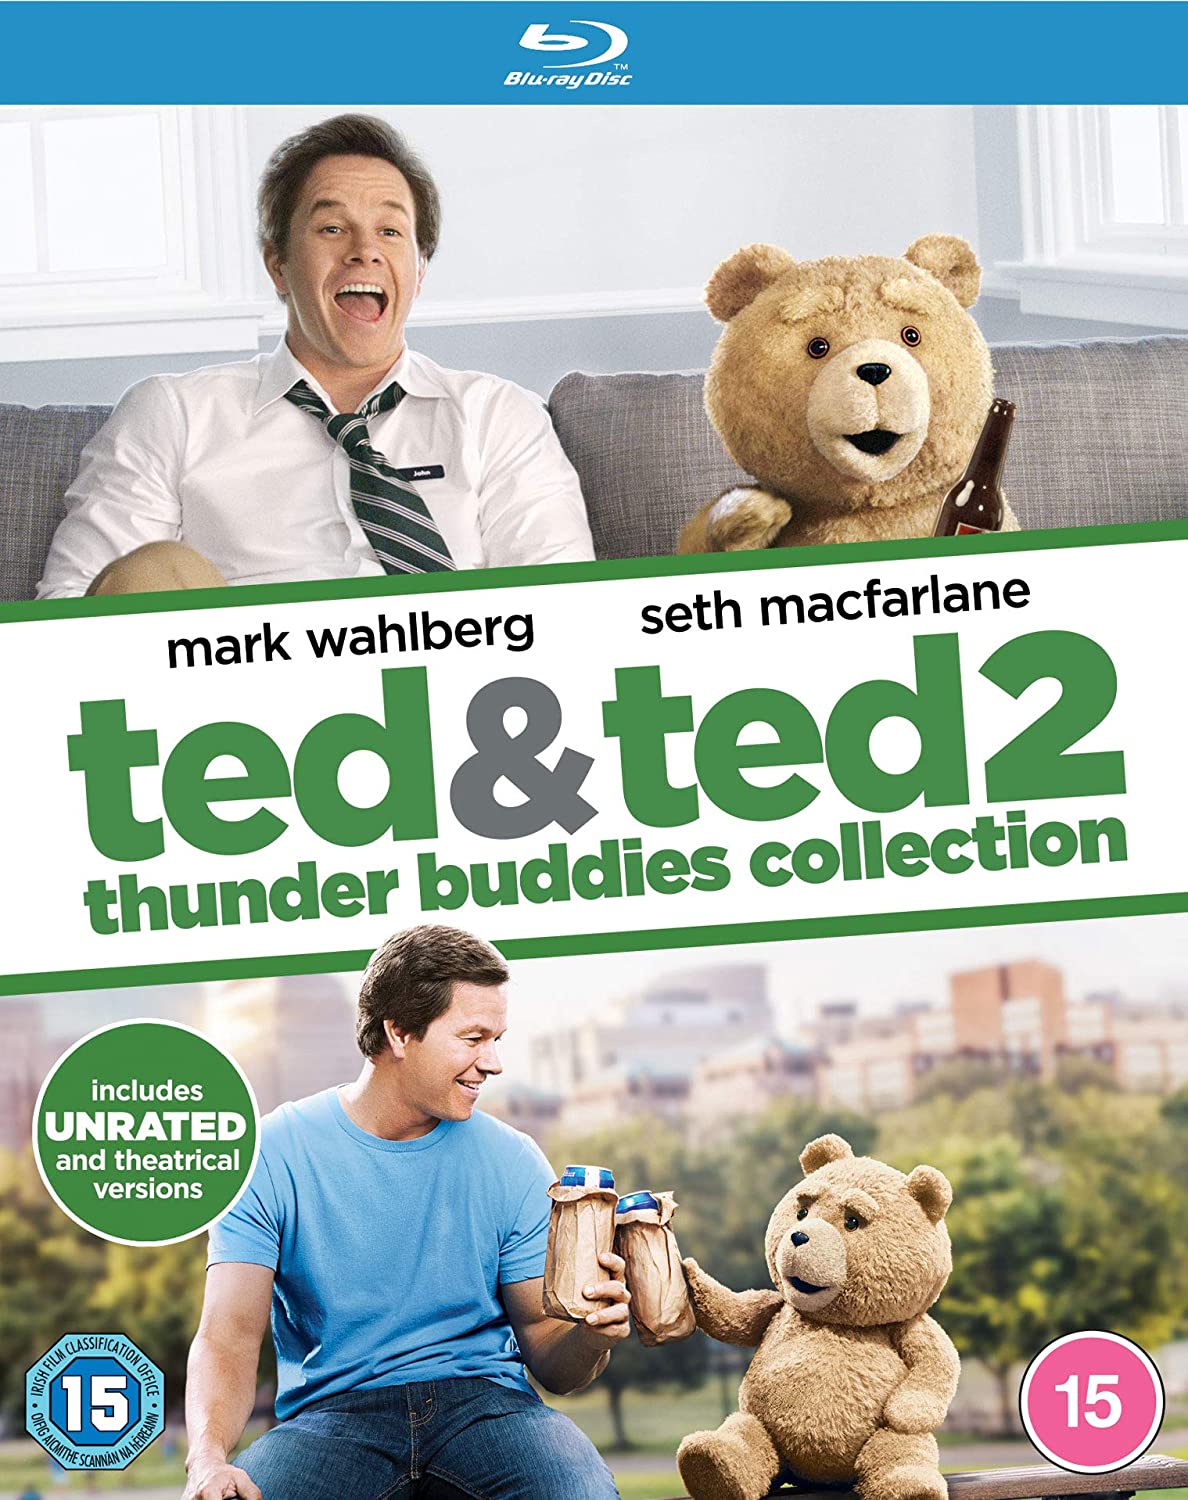 boom competitions -  win Ted 1 and 2 on blu-ray